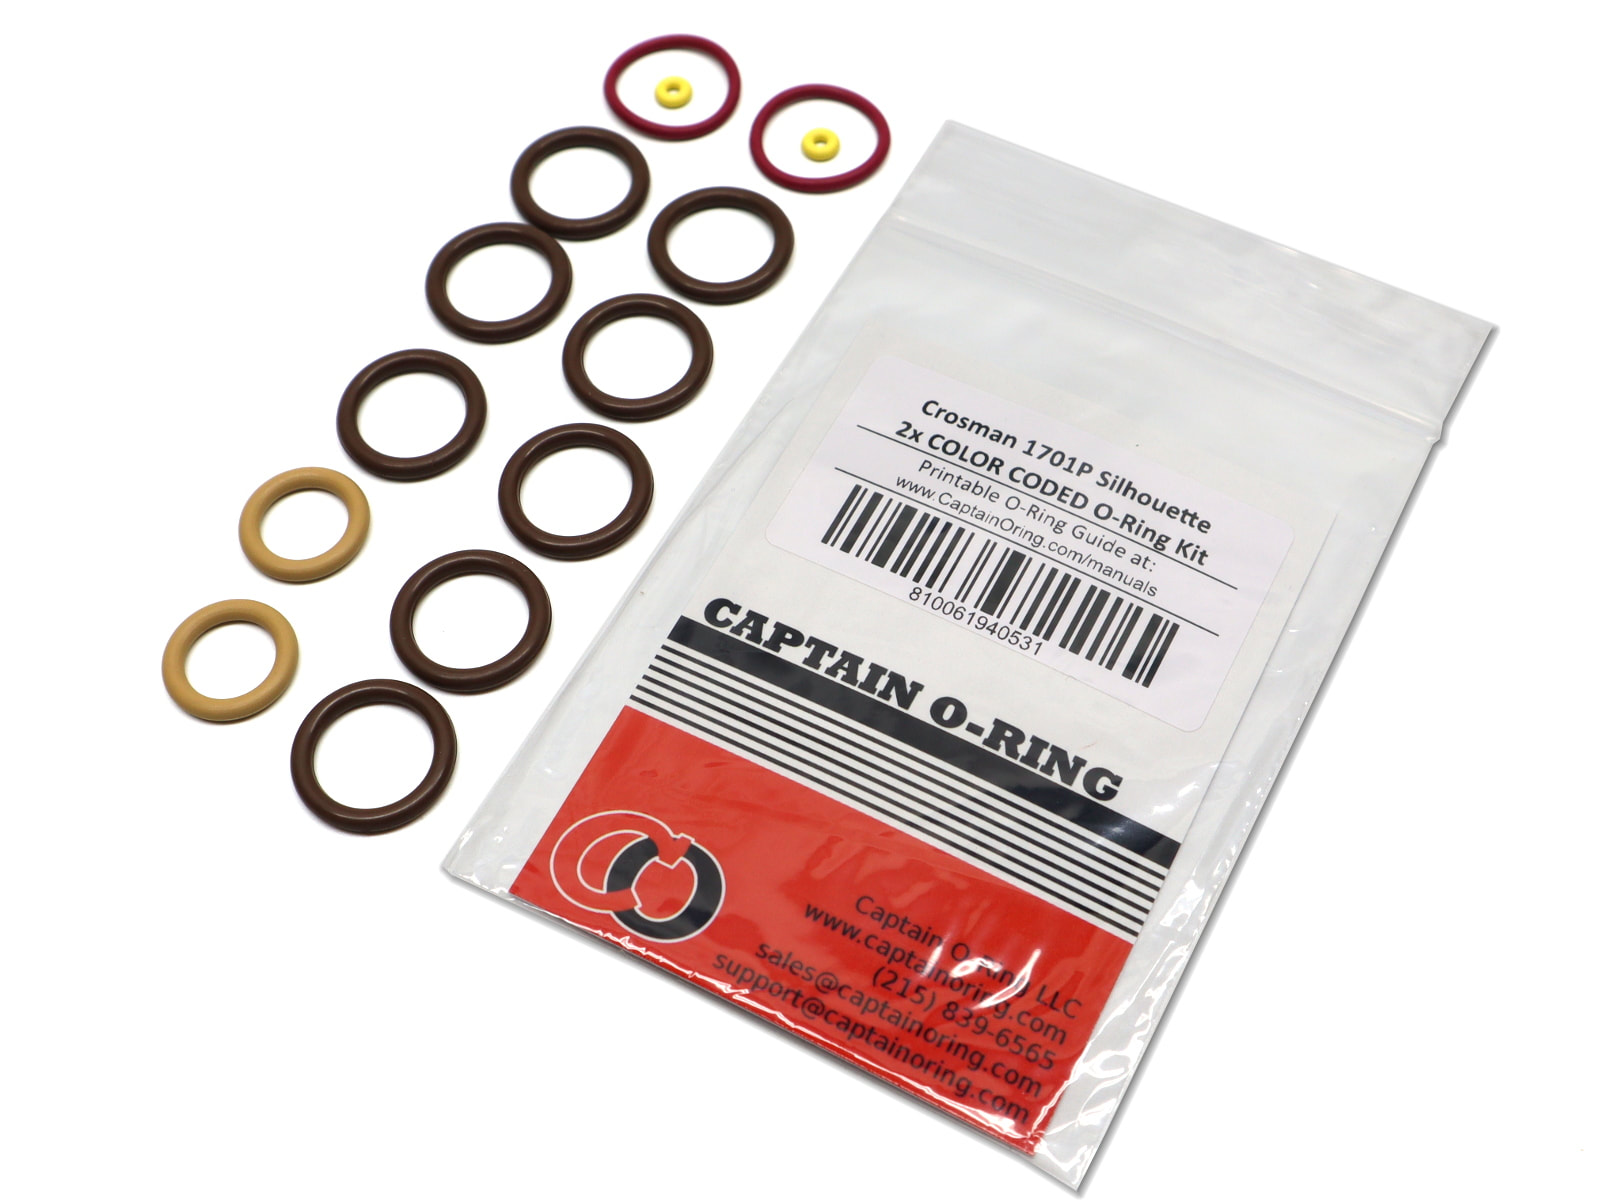 Crosman Benjamin As392t .22 Air Rifle 2x Color Oring Seal Kit by Captain O-ring for sale online 